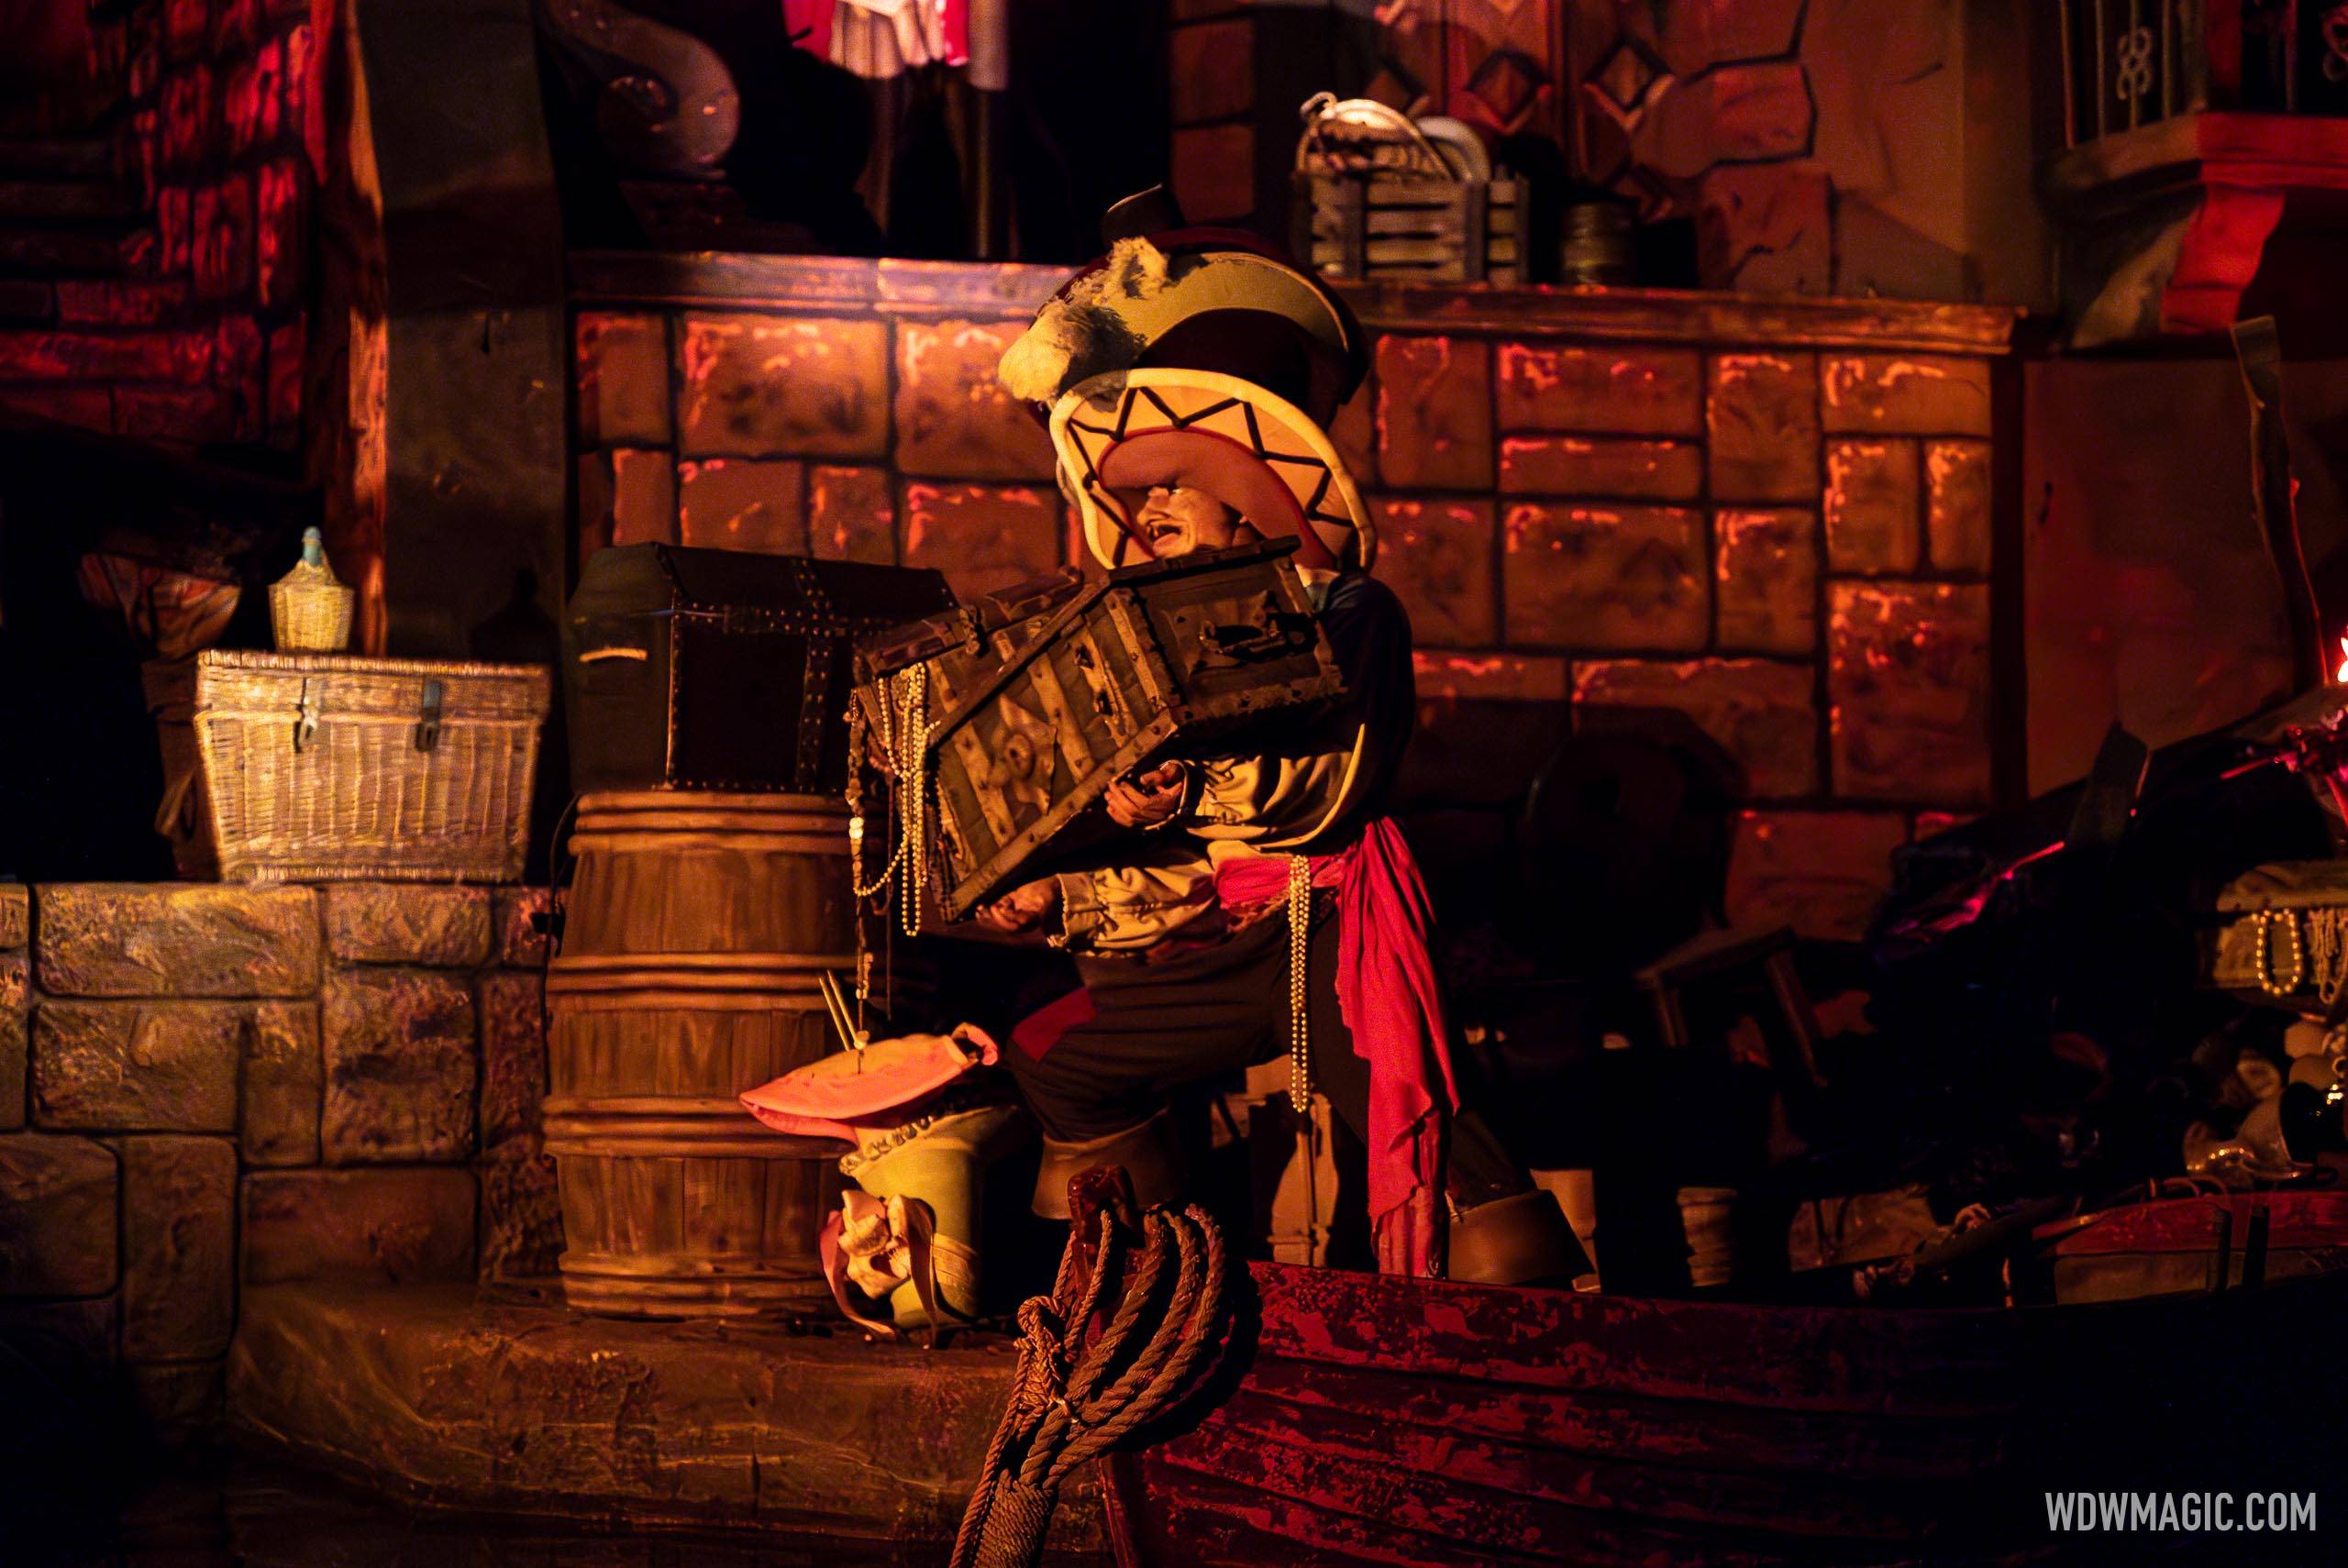 VIDEO - Take a ride through of the new auction scene at Pirates of the Caribbean